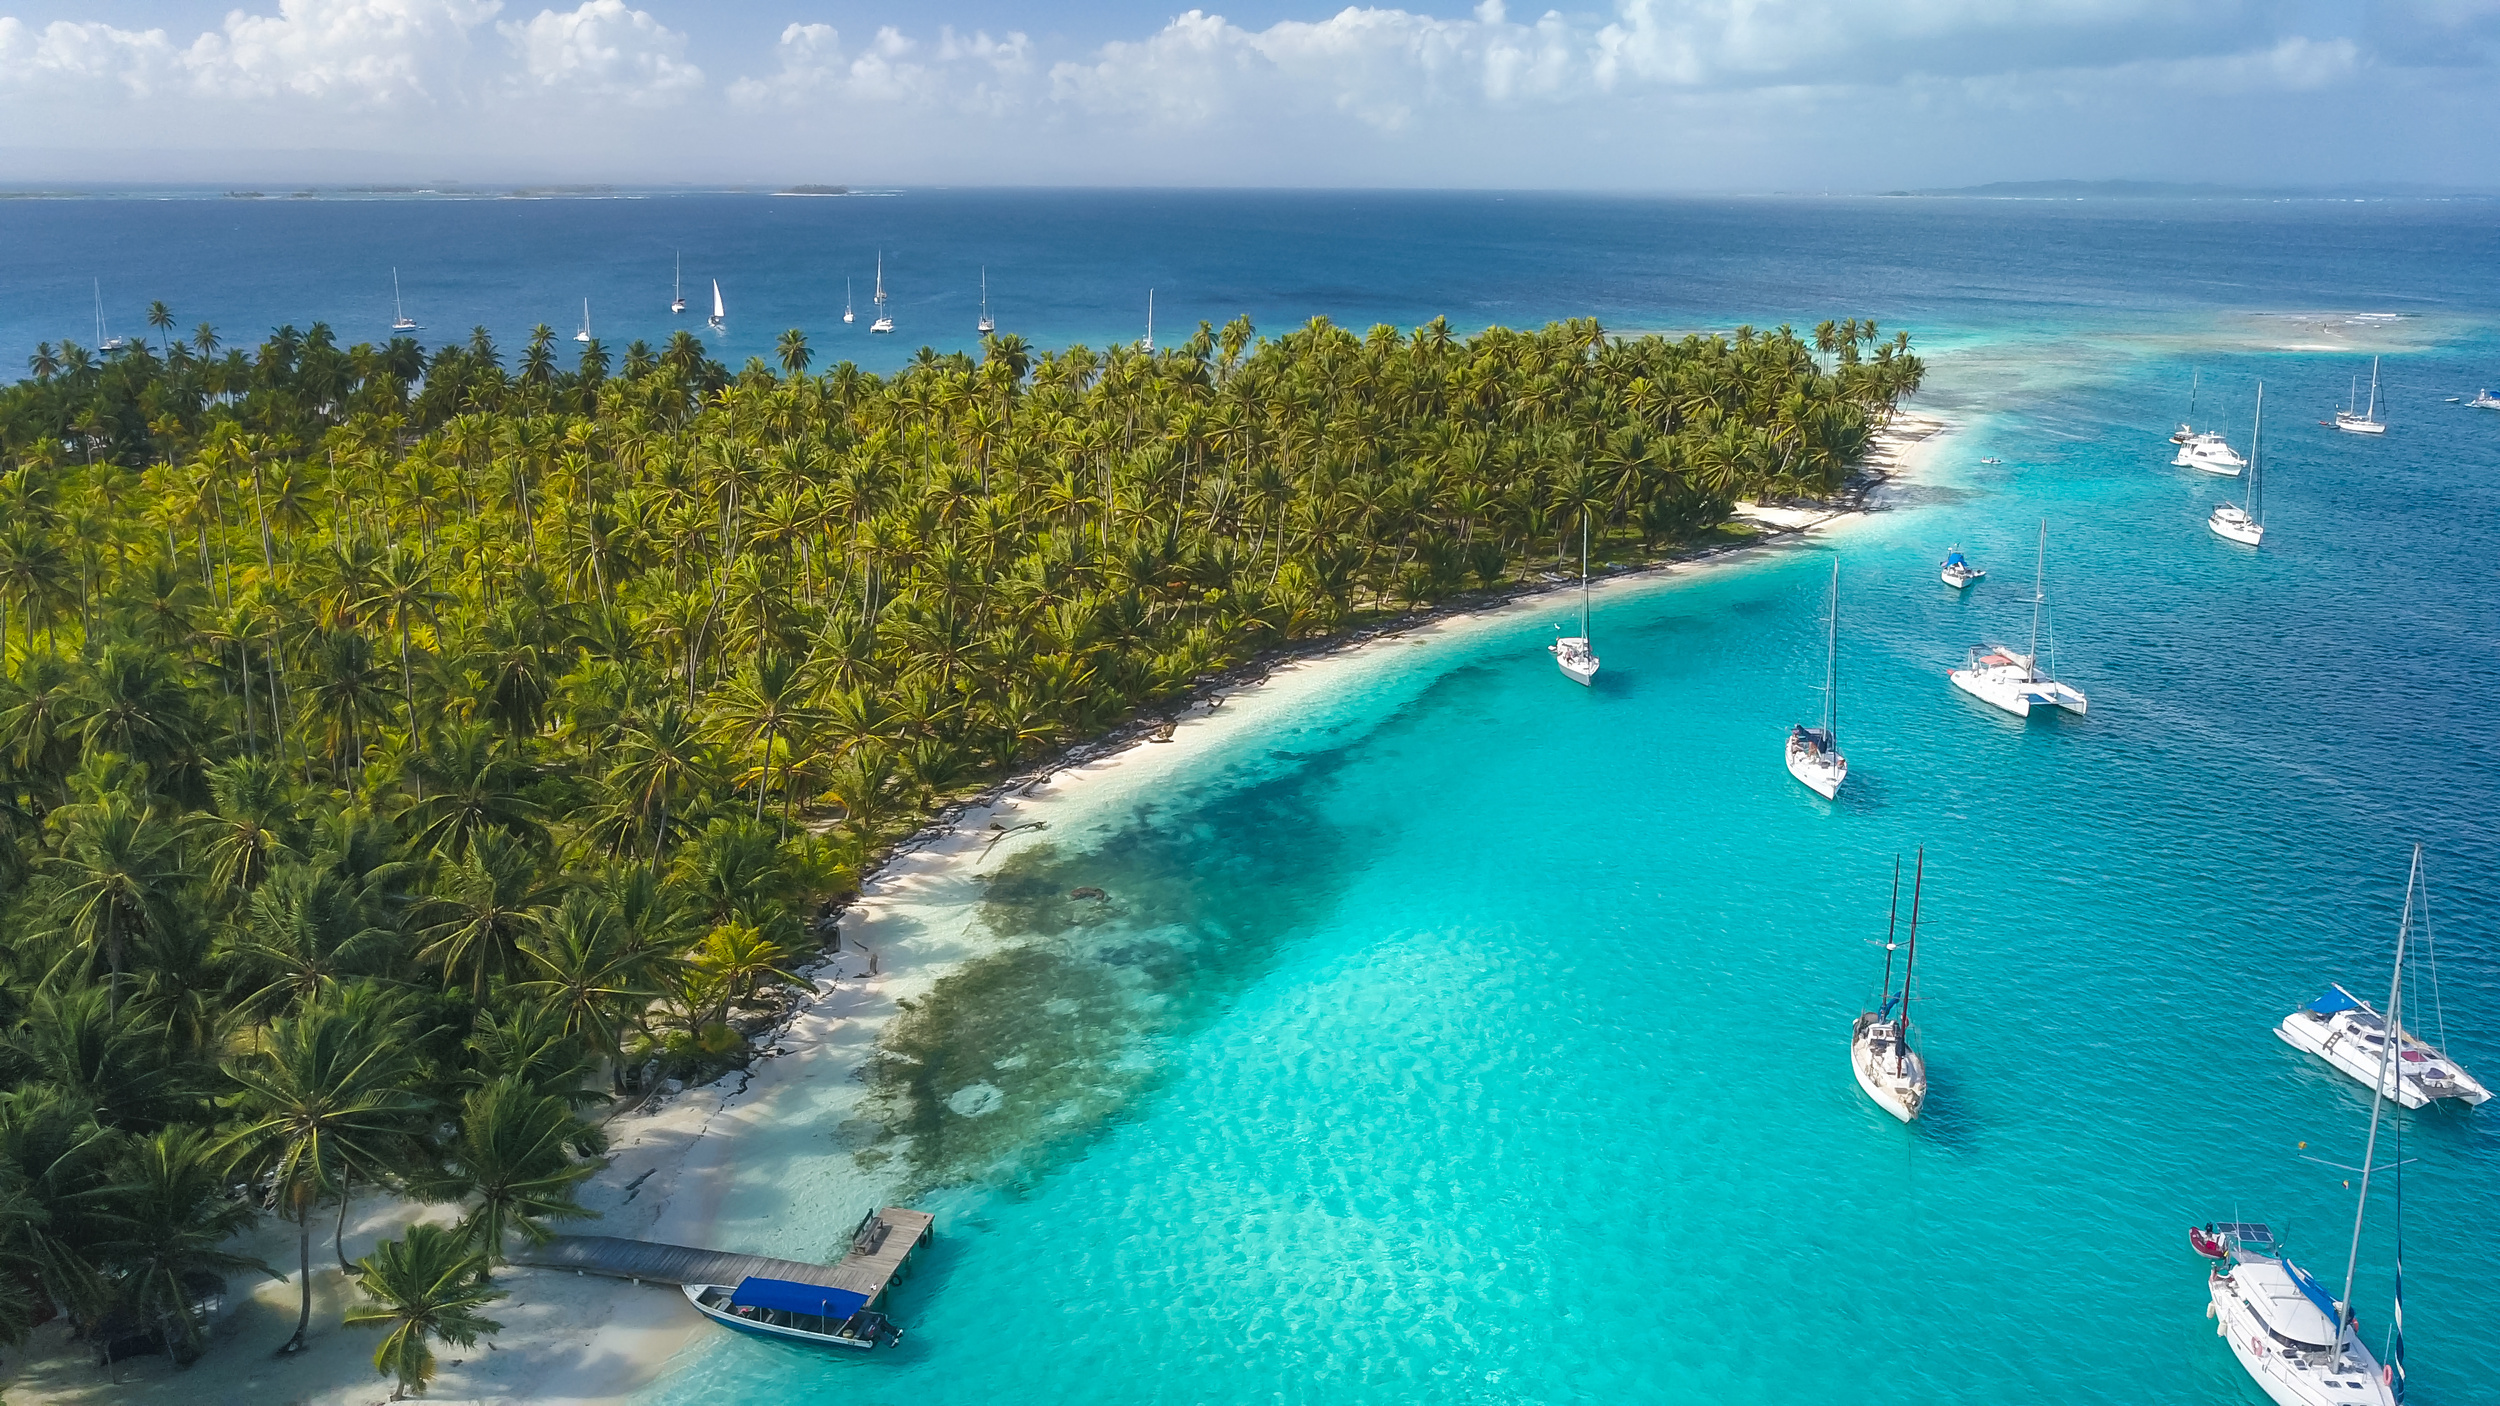 <p>The Panamanian archipelago of San Blas Islands is known to be a great area for sailing, and it’s generally safe from hurricanes. However, anyone who wants to visit this remote locale should do so soon, as it’s at risk of being completely submerged due to rising waters.  </p><p><a href='https://www.msn.com/en-us/community/channel/vid-cj9pqbr0vn9in2b6ddcd8sfgpfq6x6utp44fssrv6mc2gtybw0us'>Follow us on MSN to see more of our exclusive lifestyle content.</a></p>